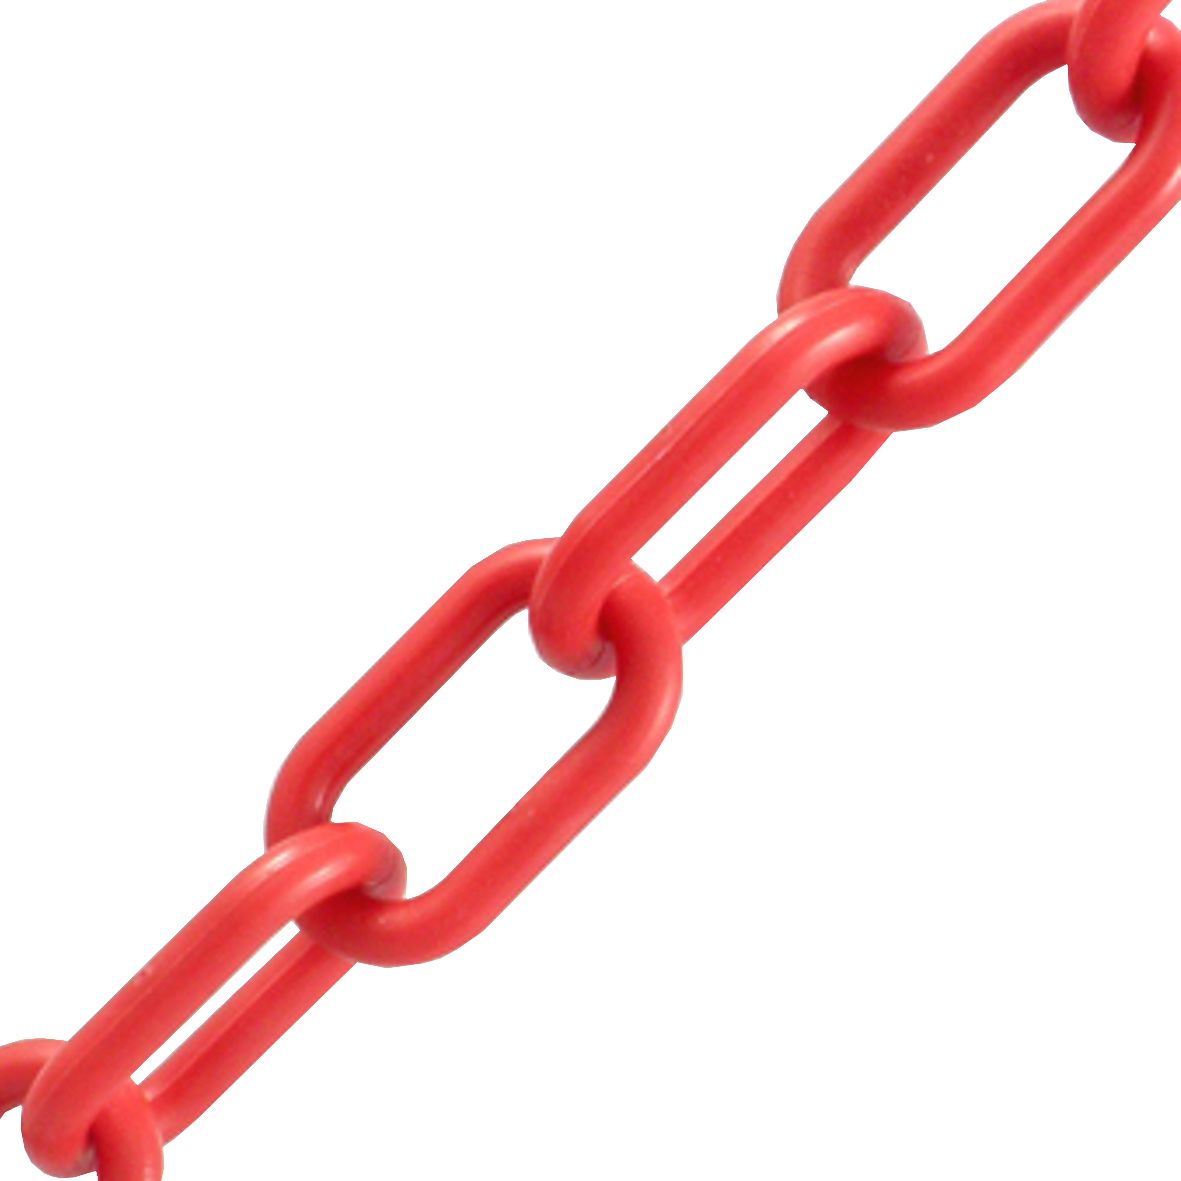 Red Plastic Chain by the metre (Maximum Length 25m